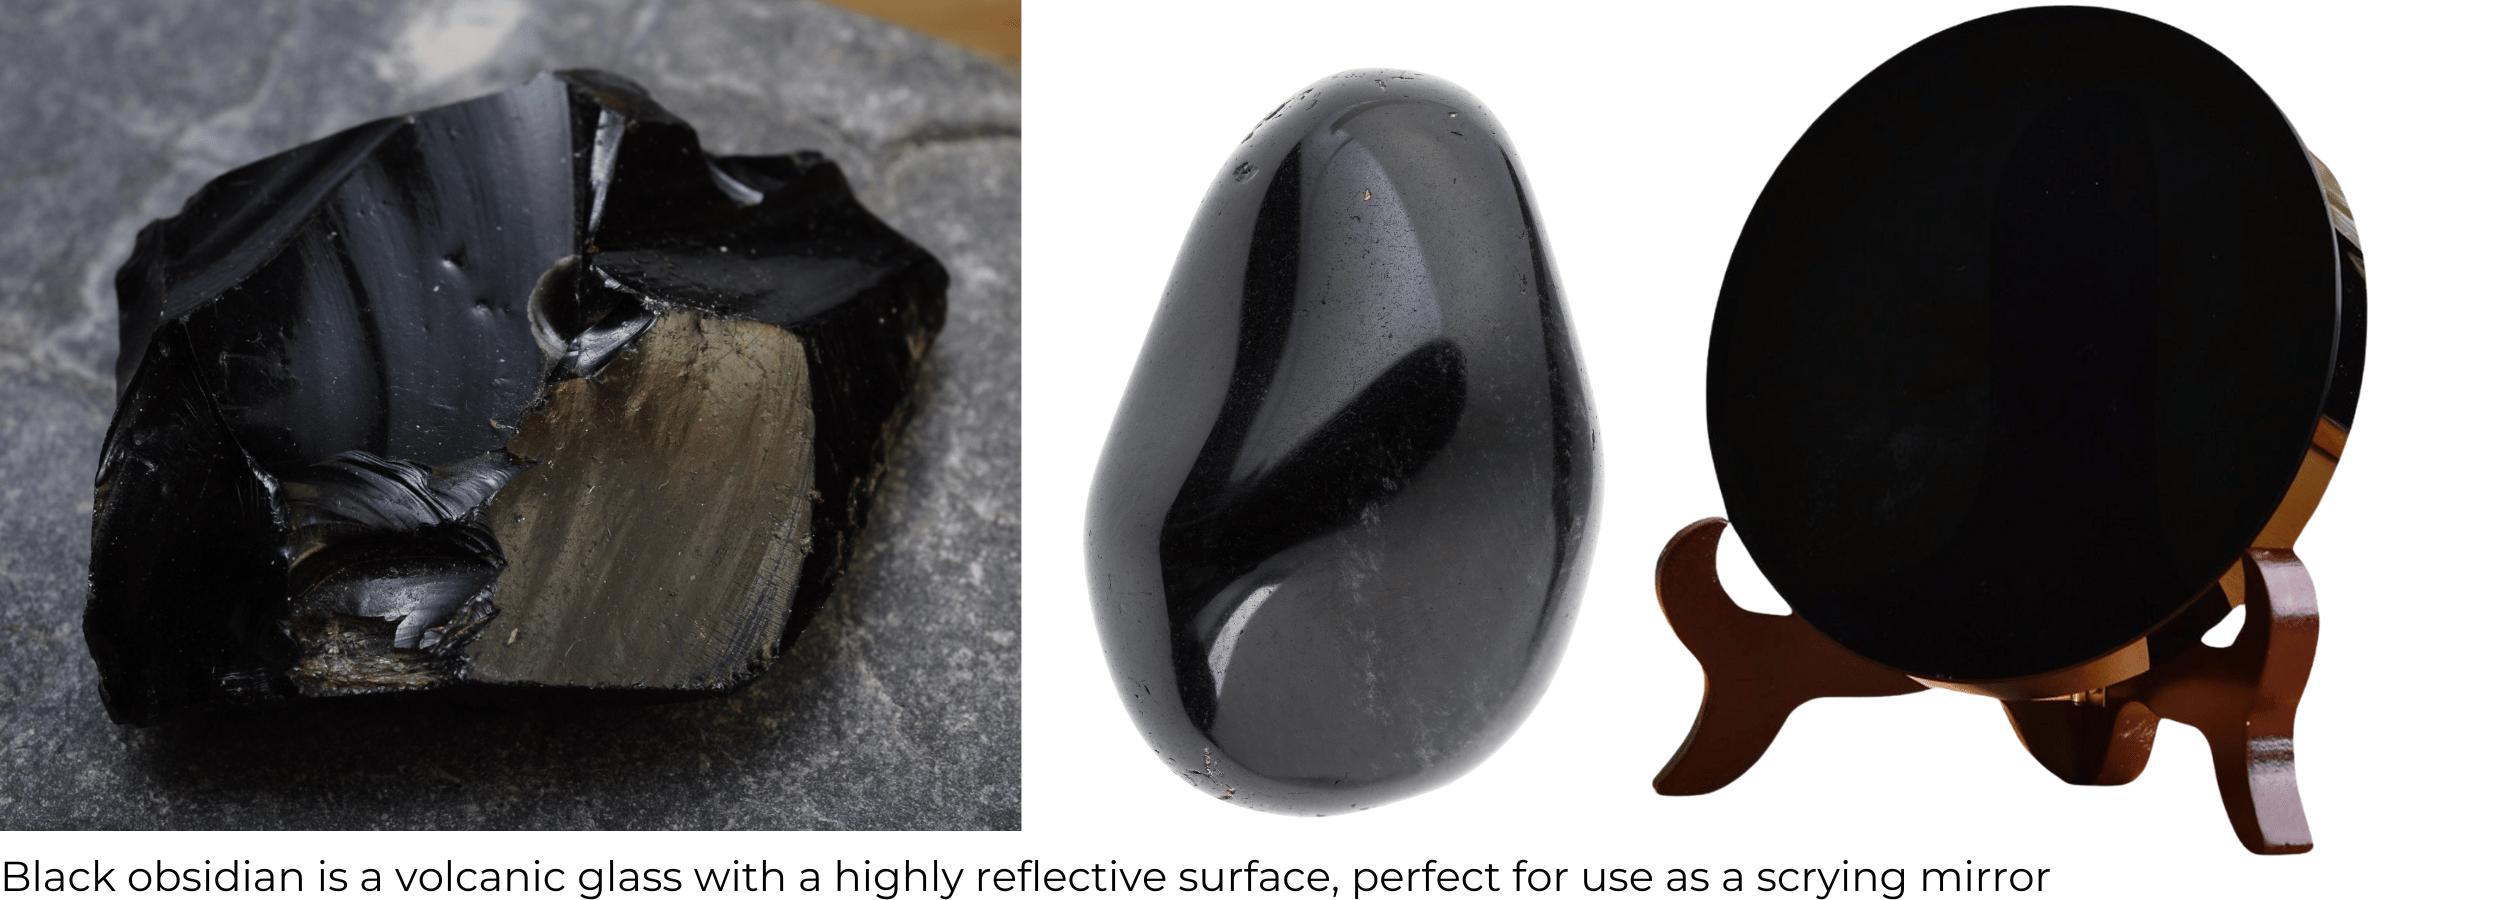 Examples of black obsidian mirrors for scrying